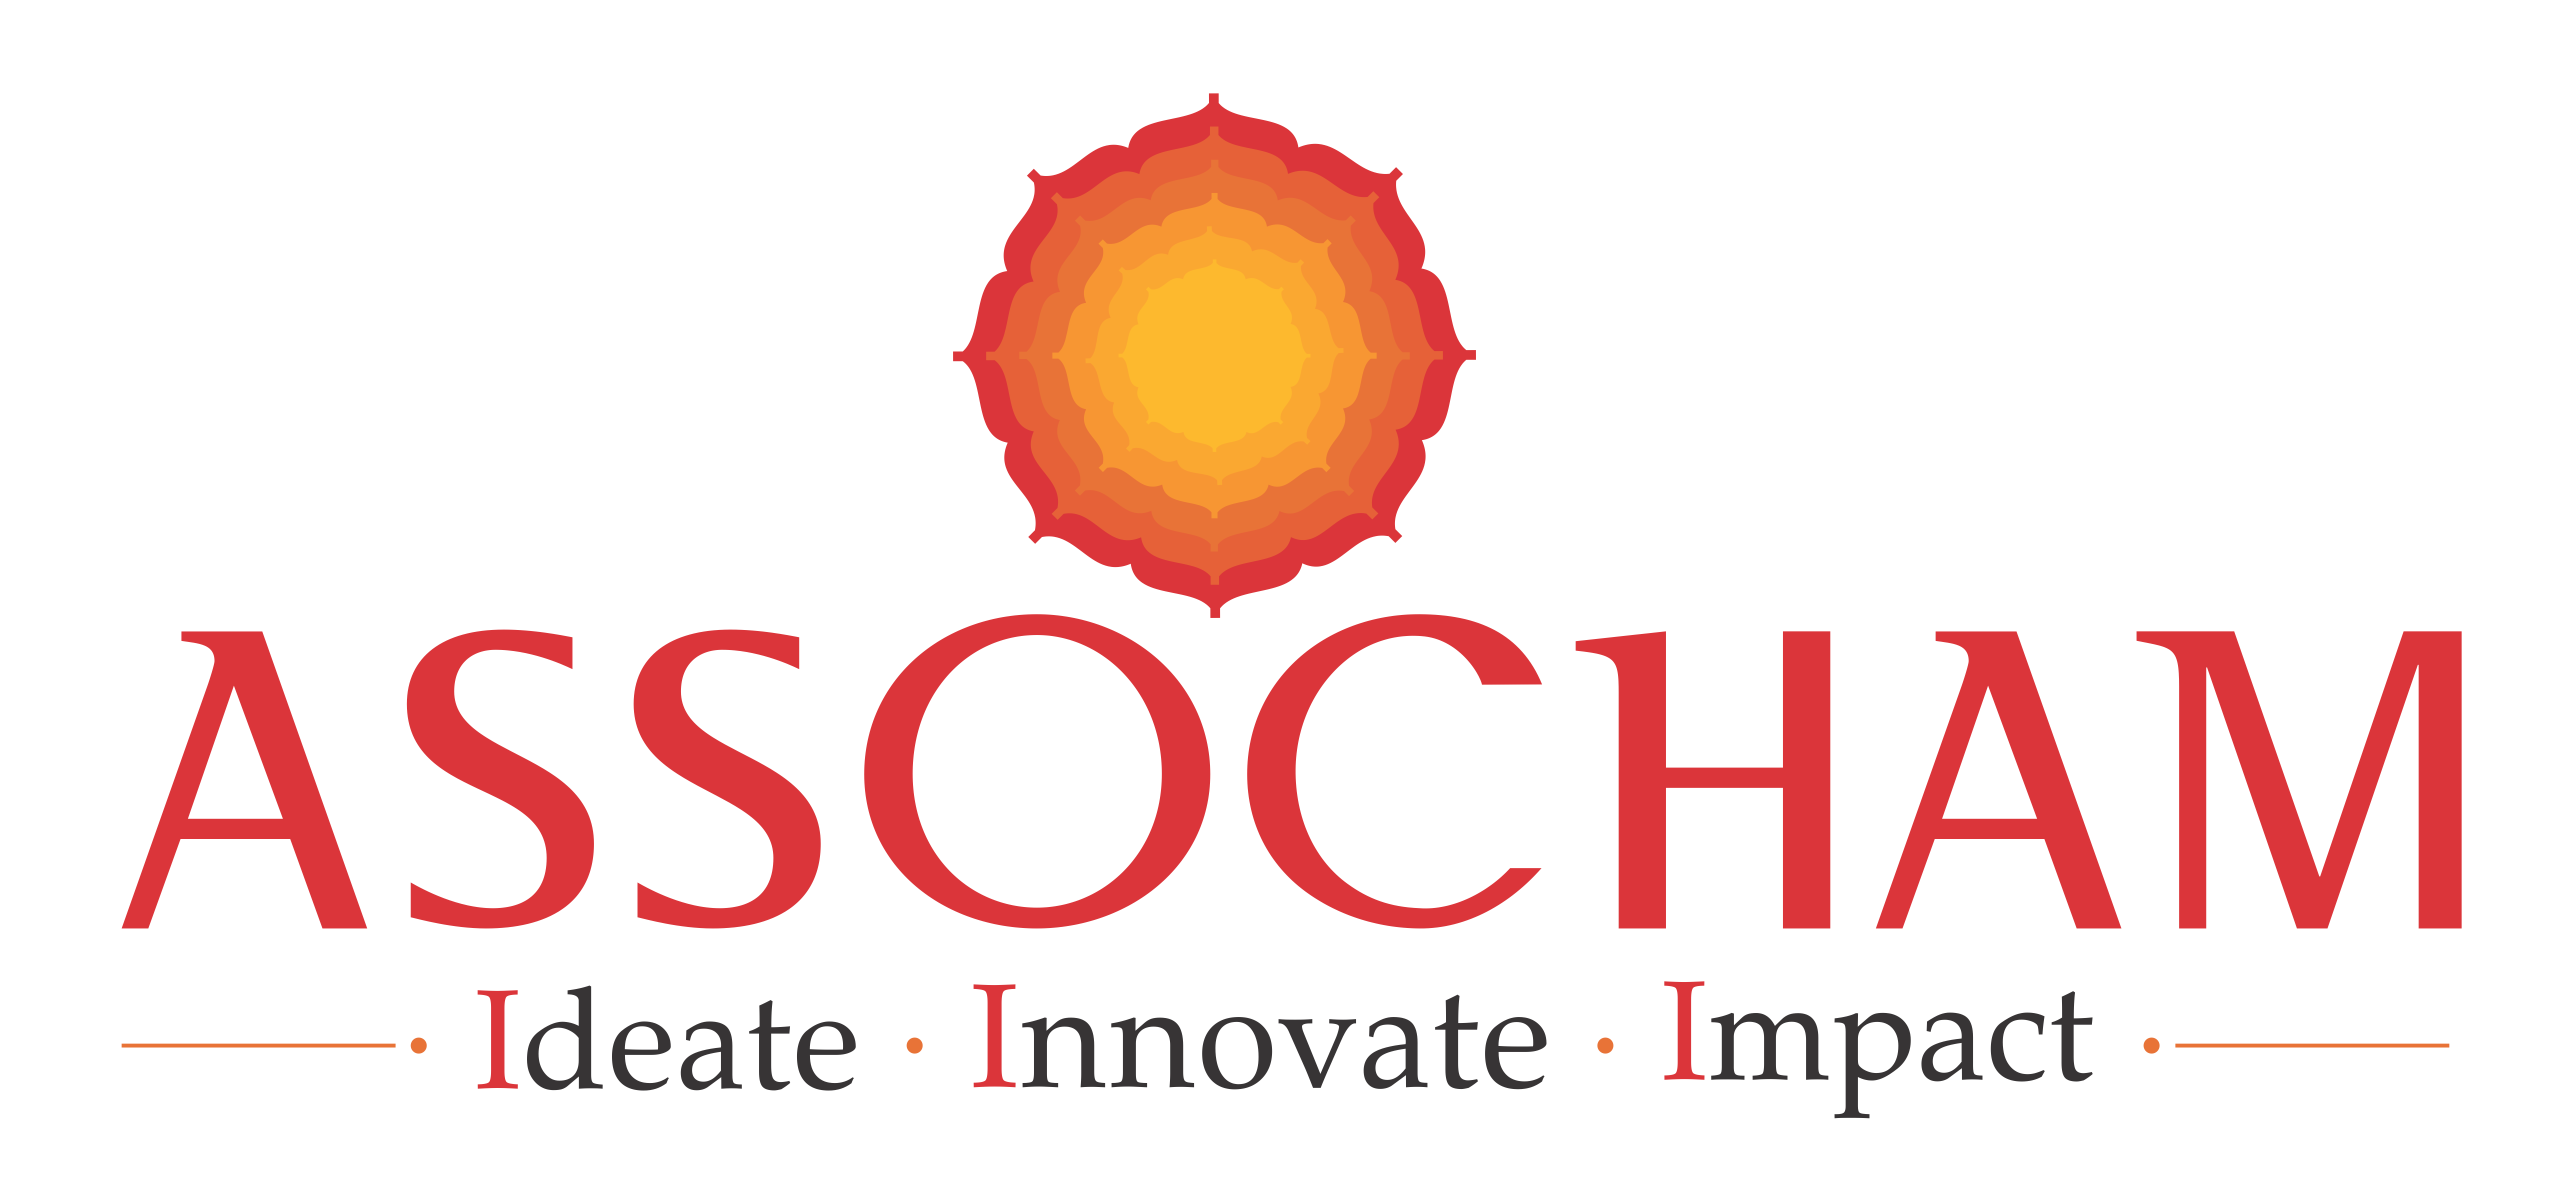 The Associated Chambers of Commerce & Industry of India (ASSOCHAM)